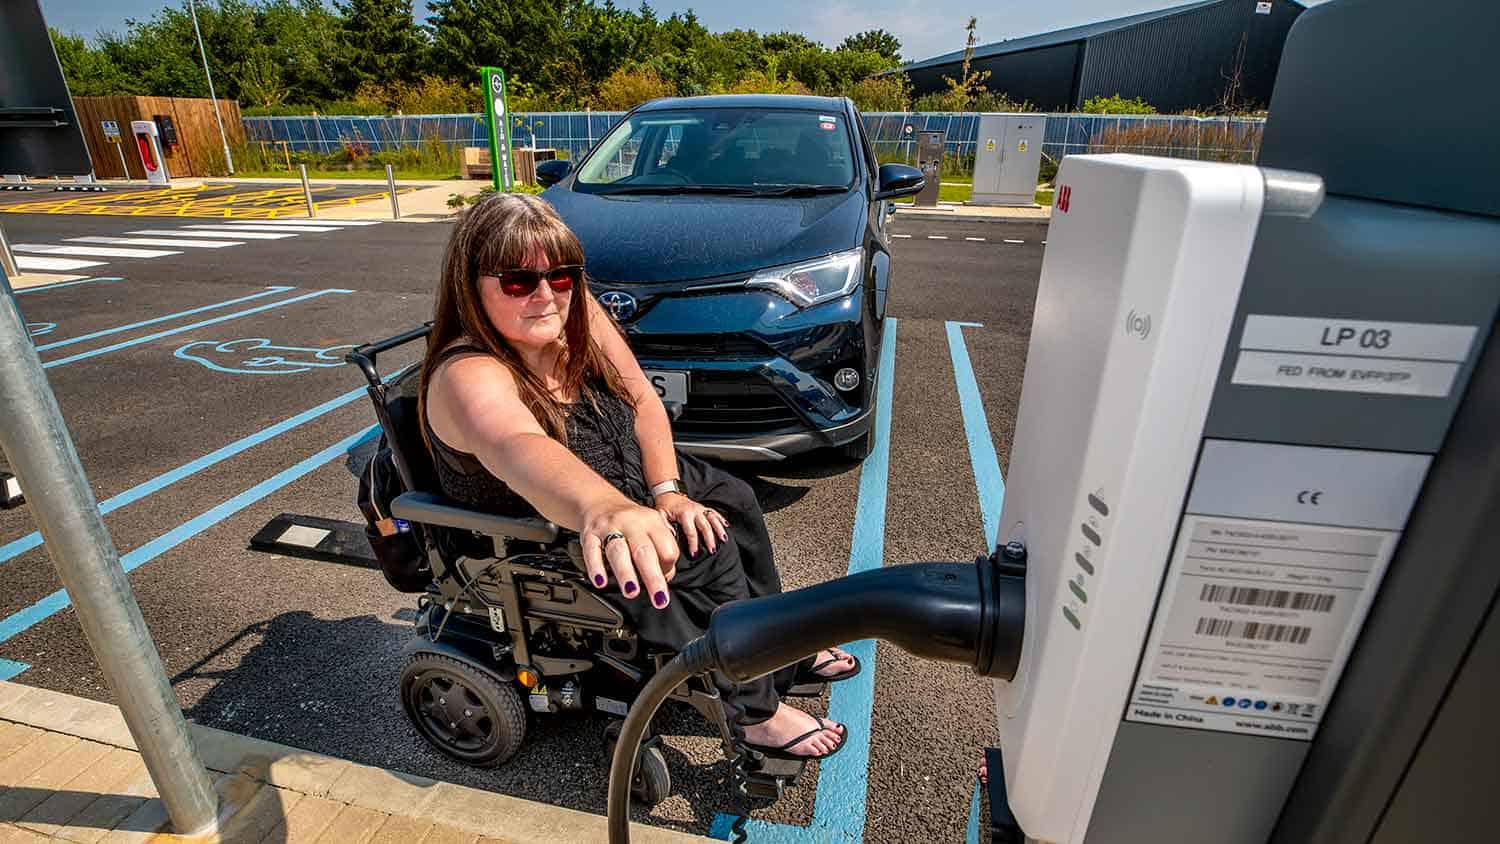 A wheelchair user struggles to reach the electric charge point cable